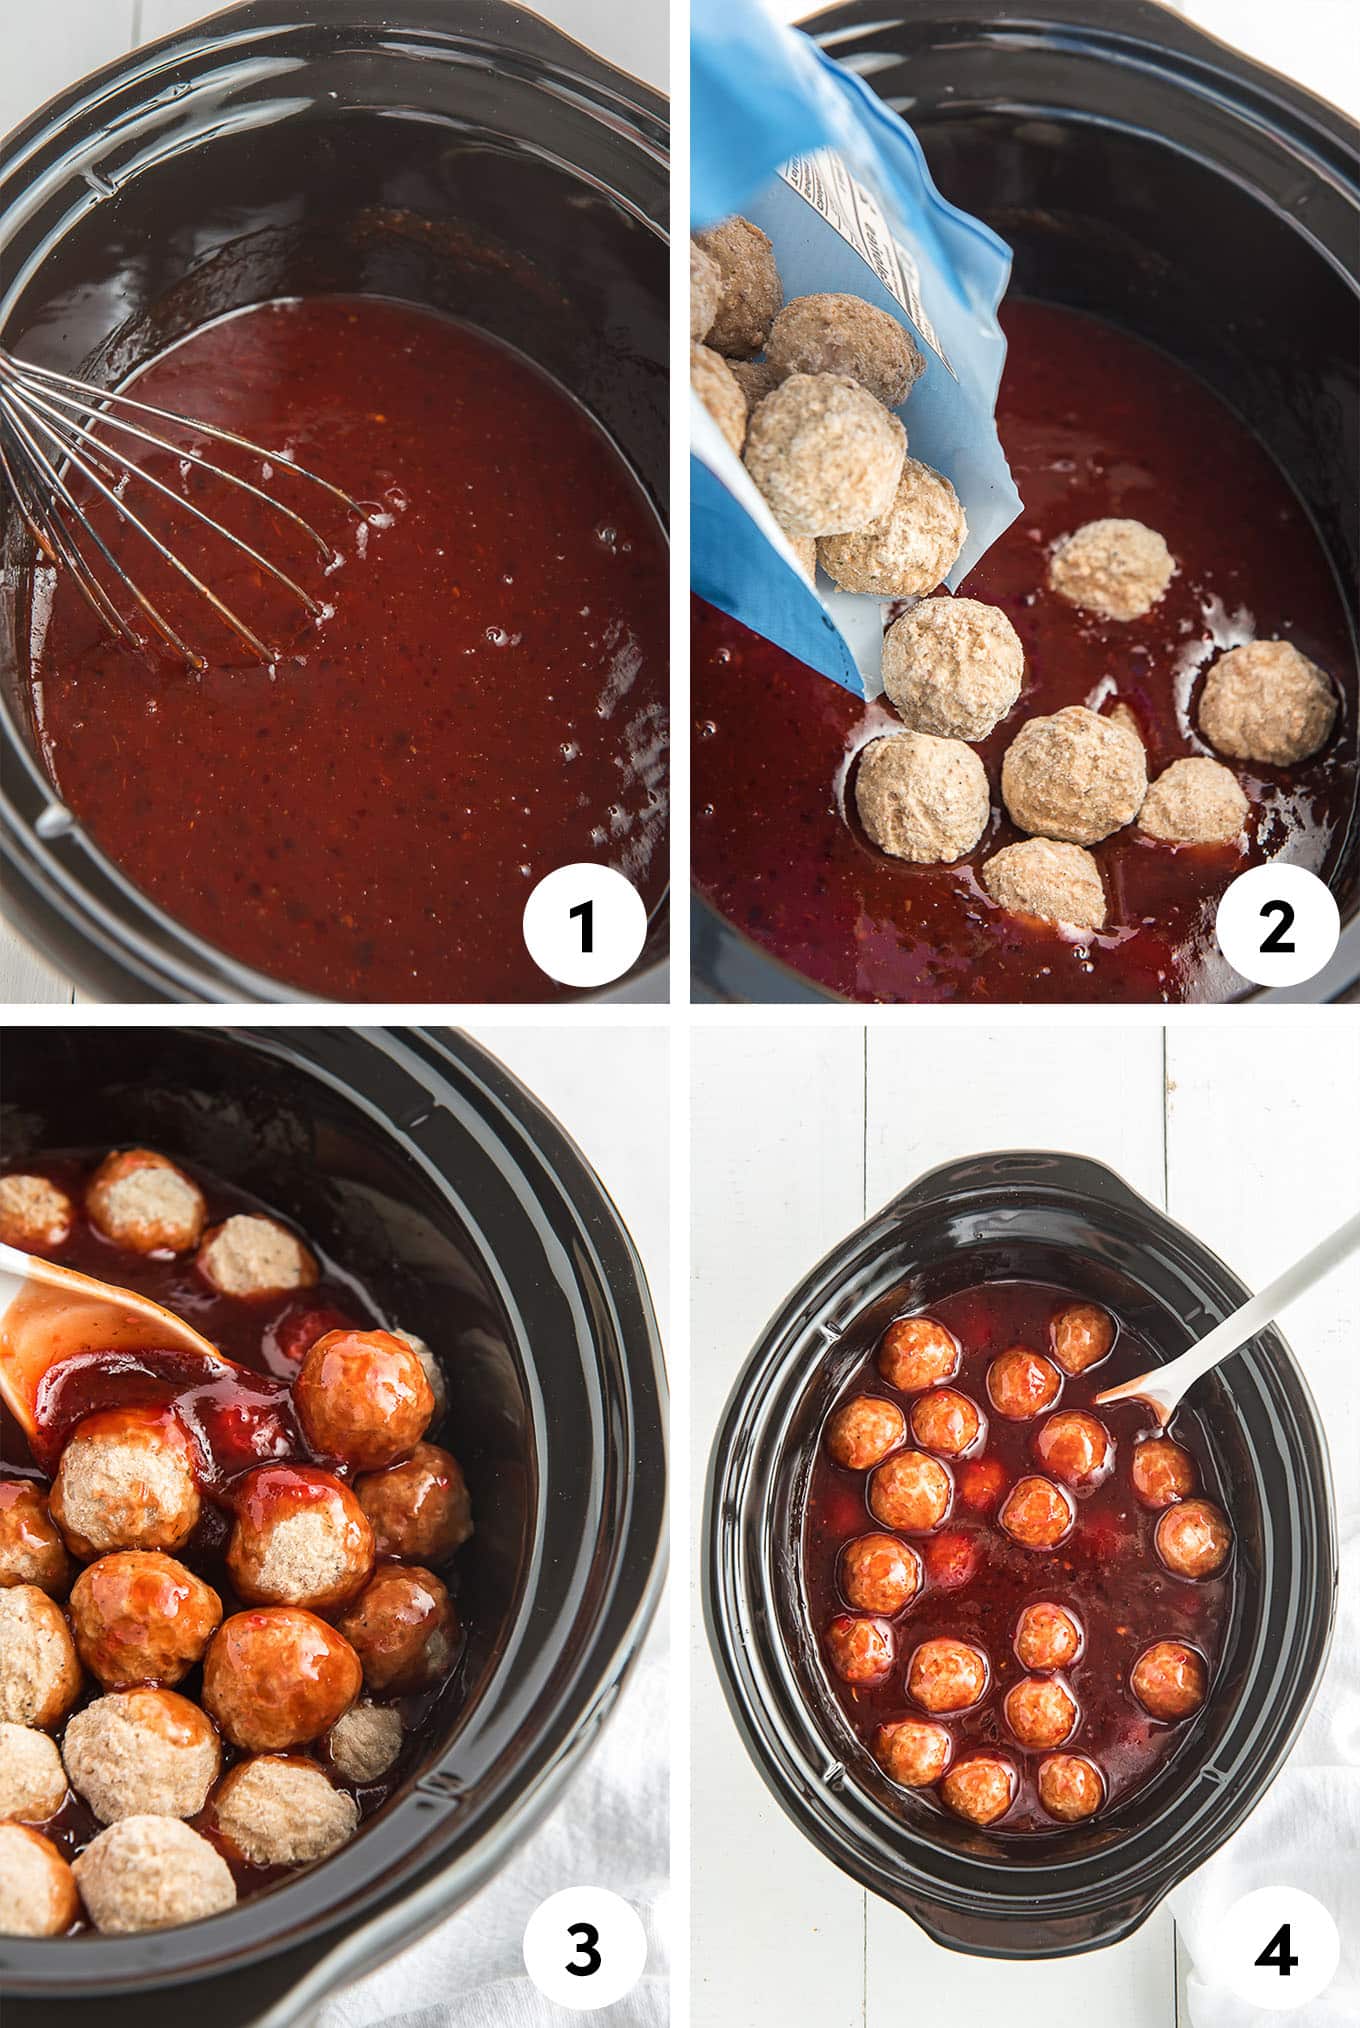 Collage of steps to make crockpot meatballs from stirring the sauce and adding the meatballs to cook.